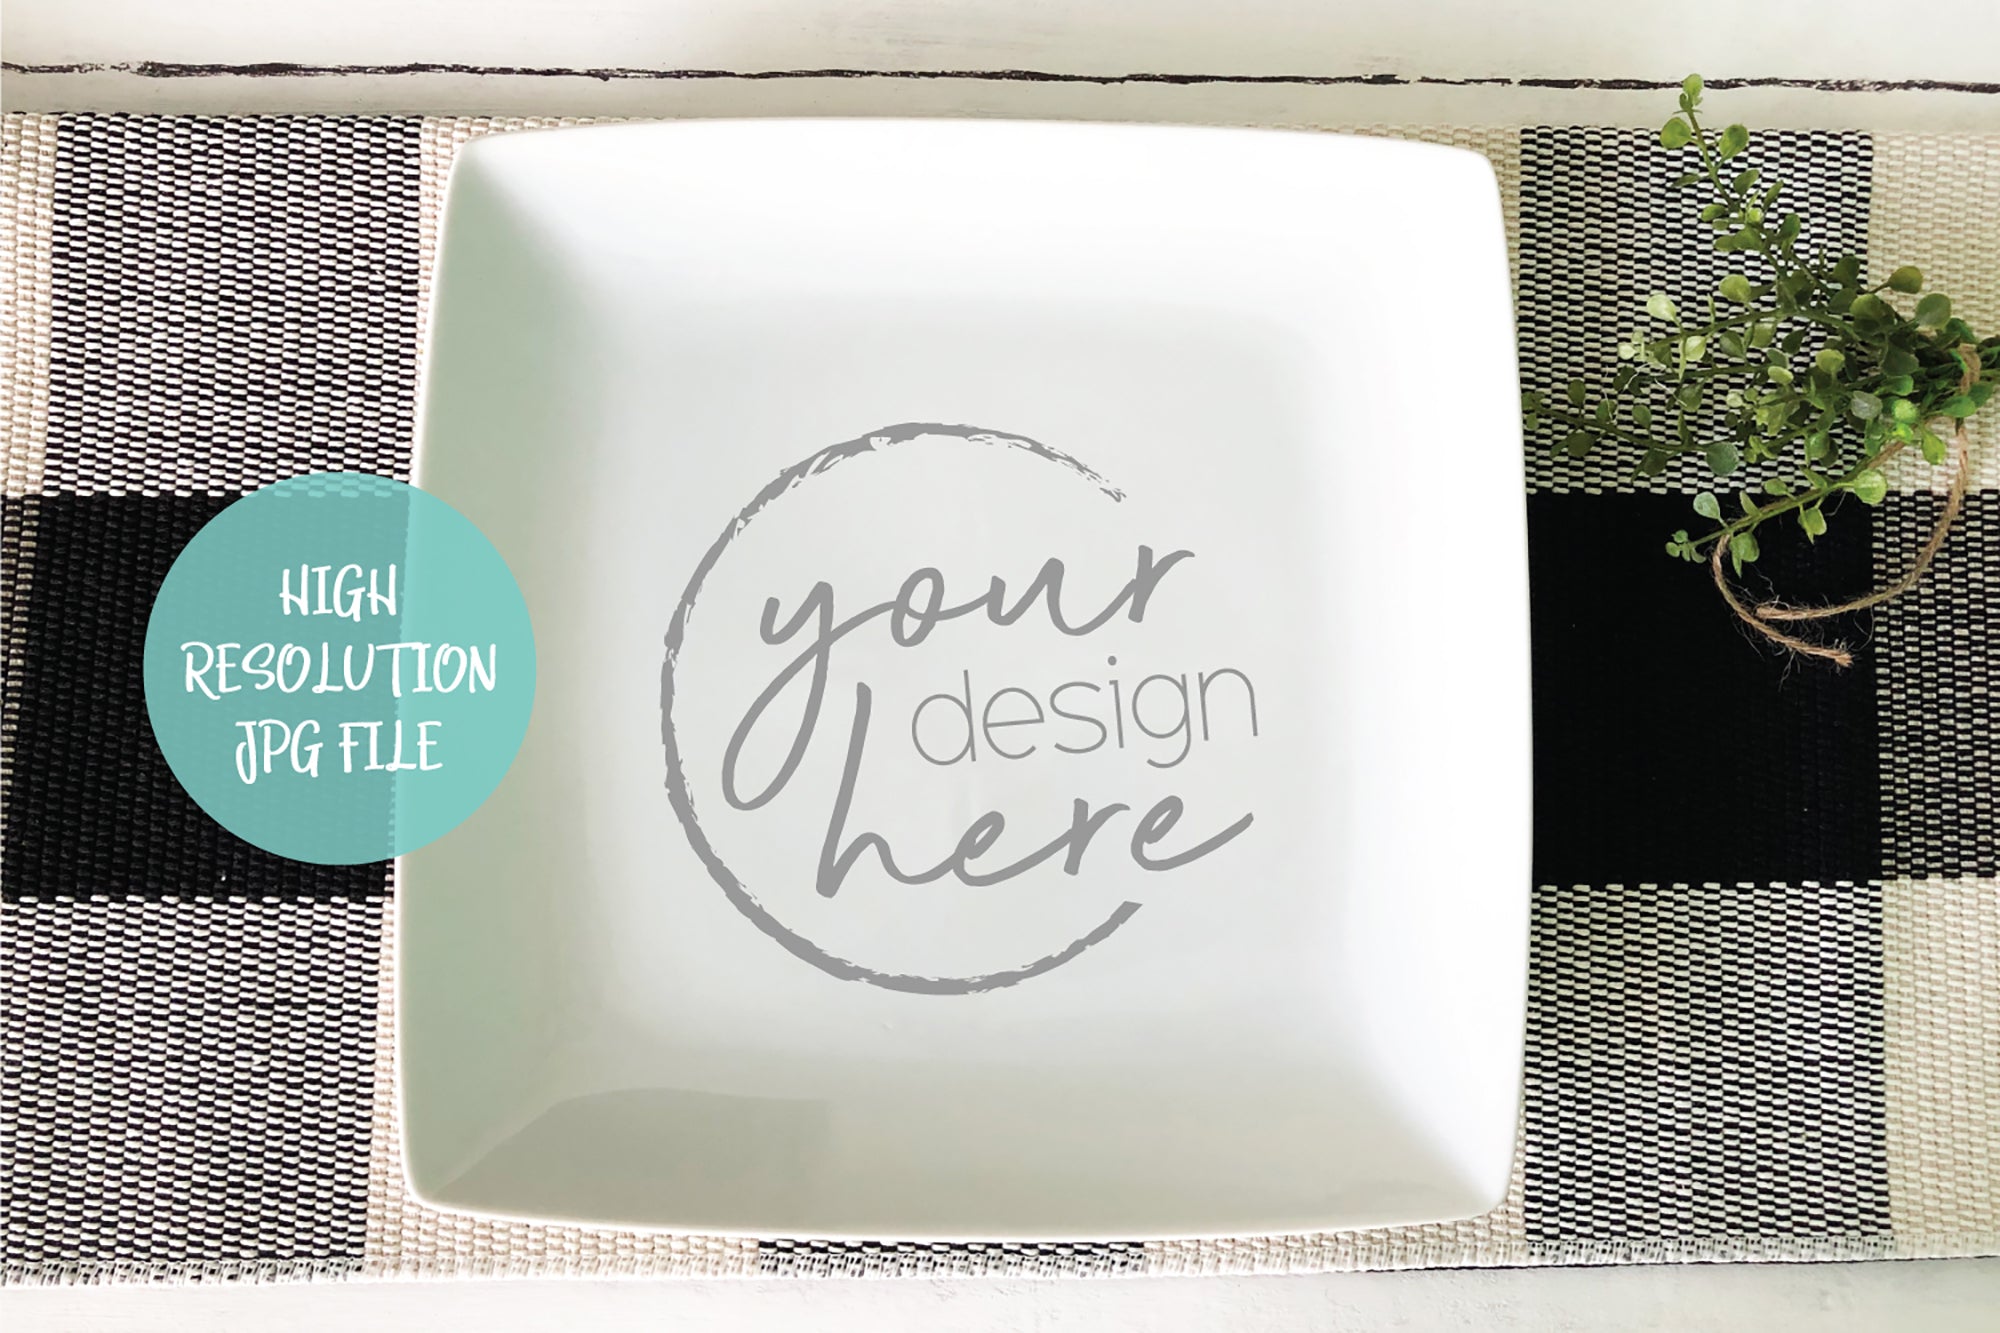 Square White Plate Mockup | Cookie Plate Mockup